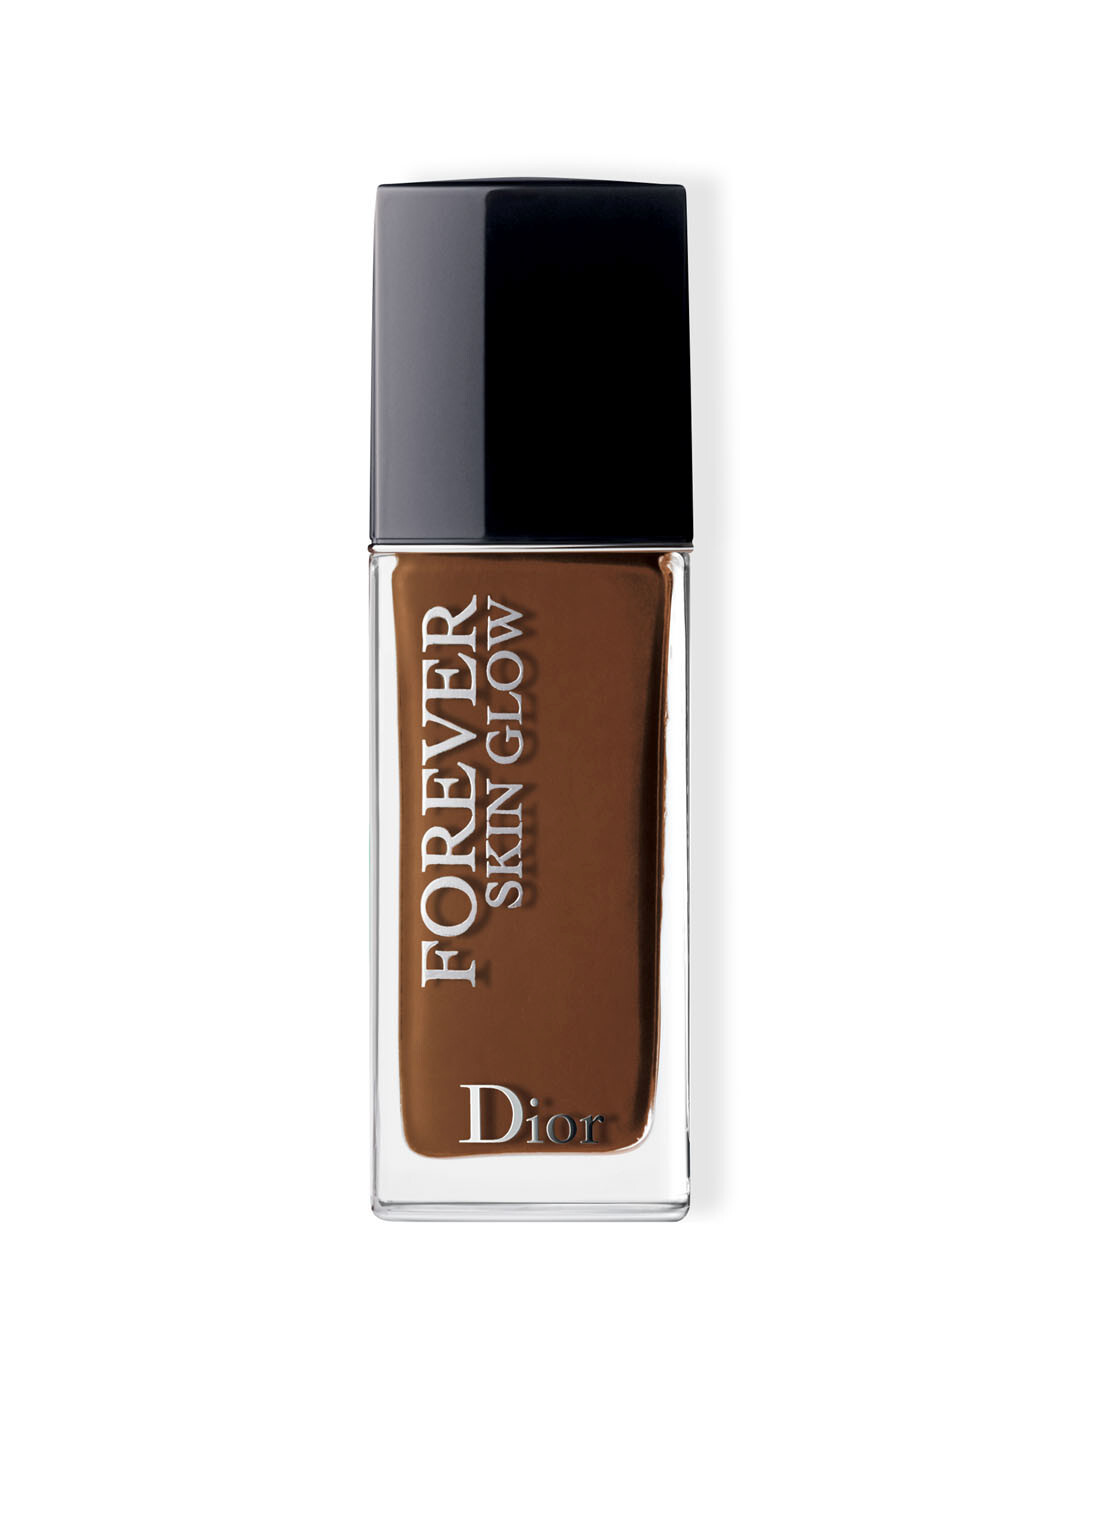 Christian Dior Forever Skin Glow Fluid Foundation SPF35/PA+++ 24h